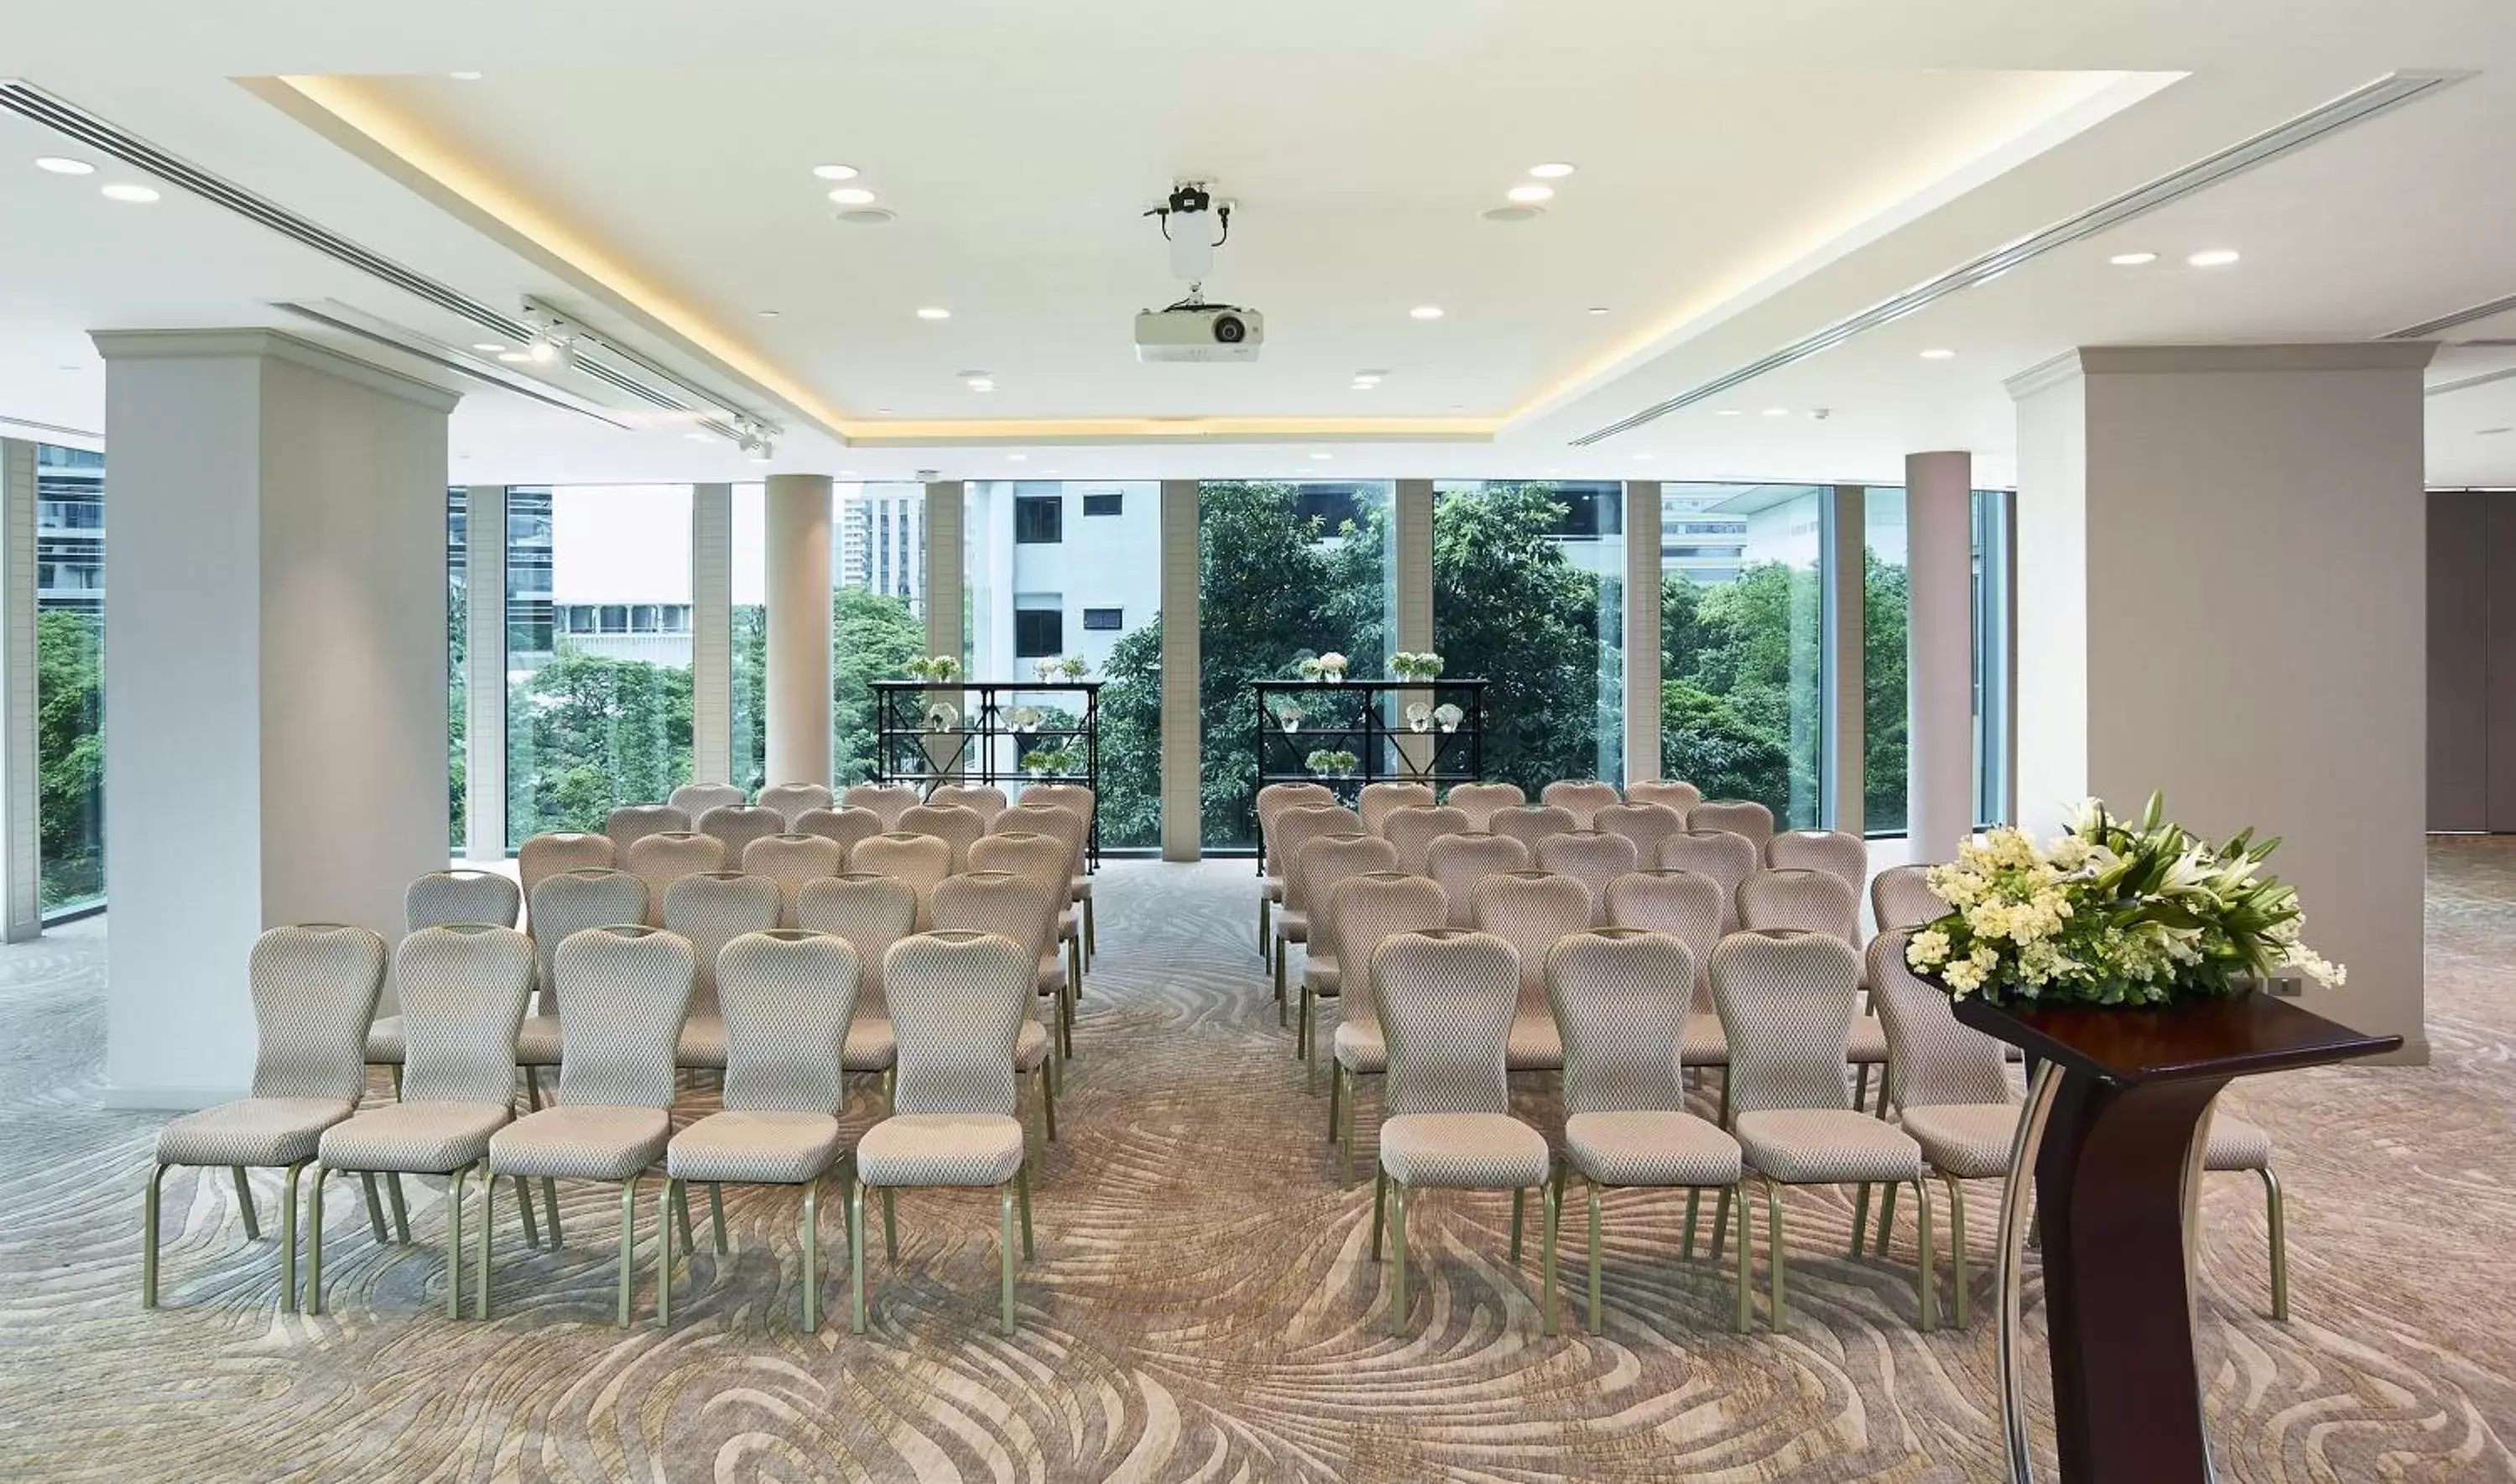 Meeting/conference room, Banquet Facilities in Oriental Residence Bangkok